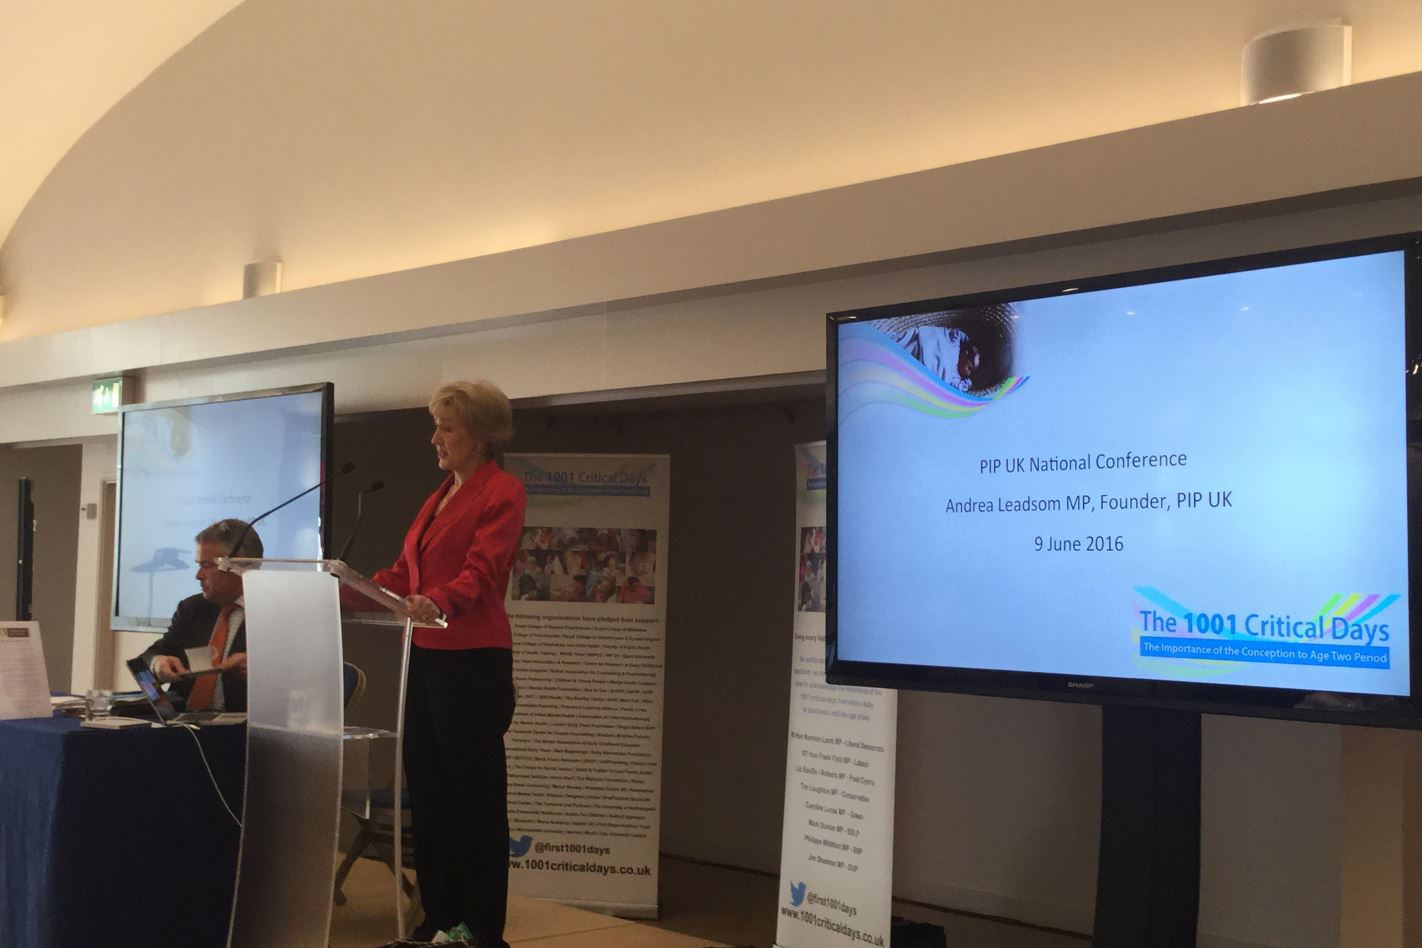 Andrea Leadsom MP addressing the IMH conference